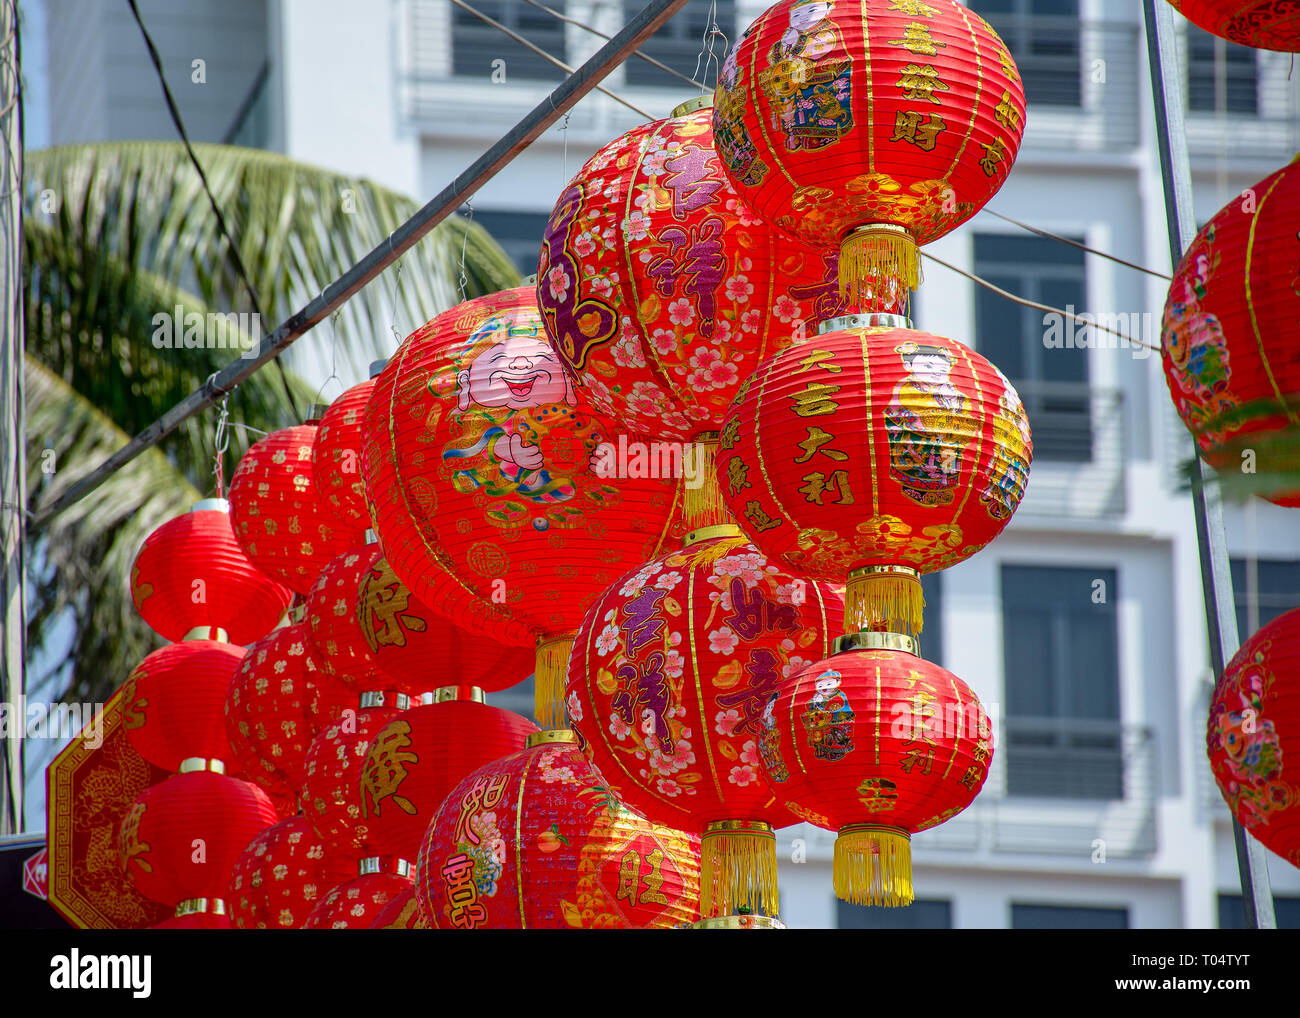 Decorative Red round Chinese lanterns hanging out for sale on the run up to Chinese New Year. Stock Photo